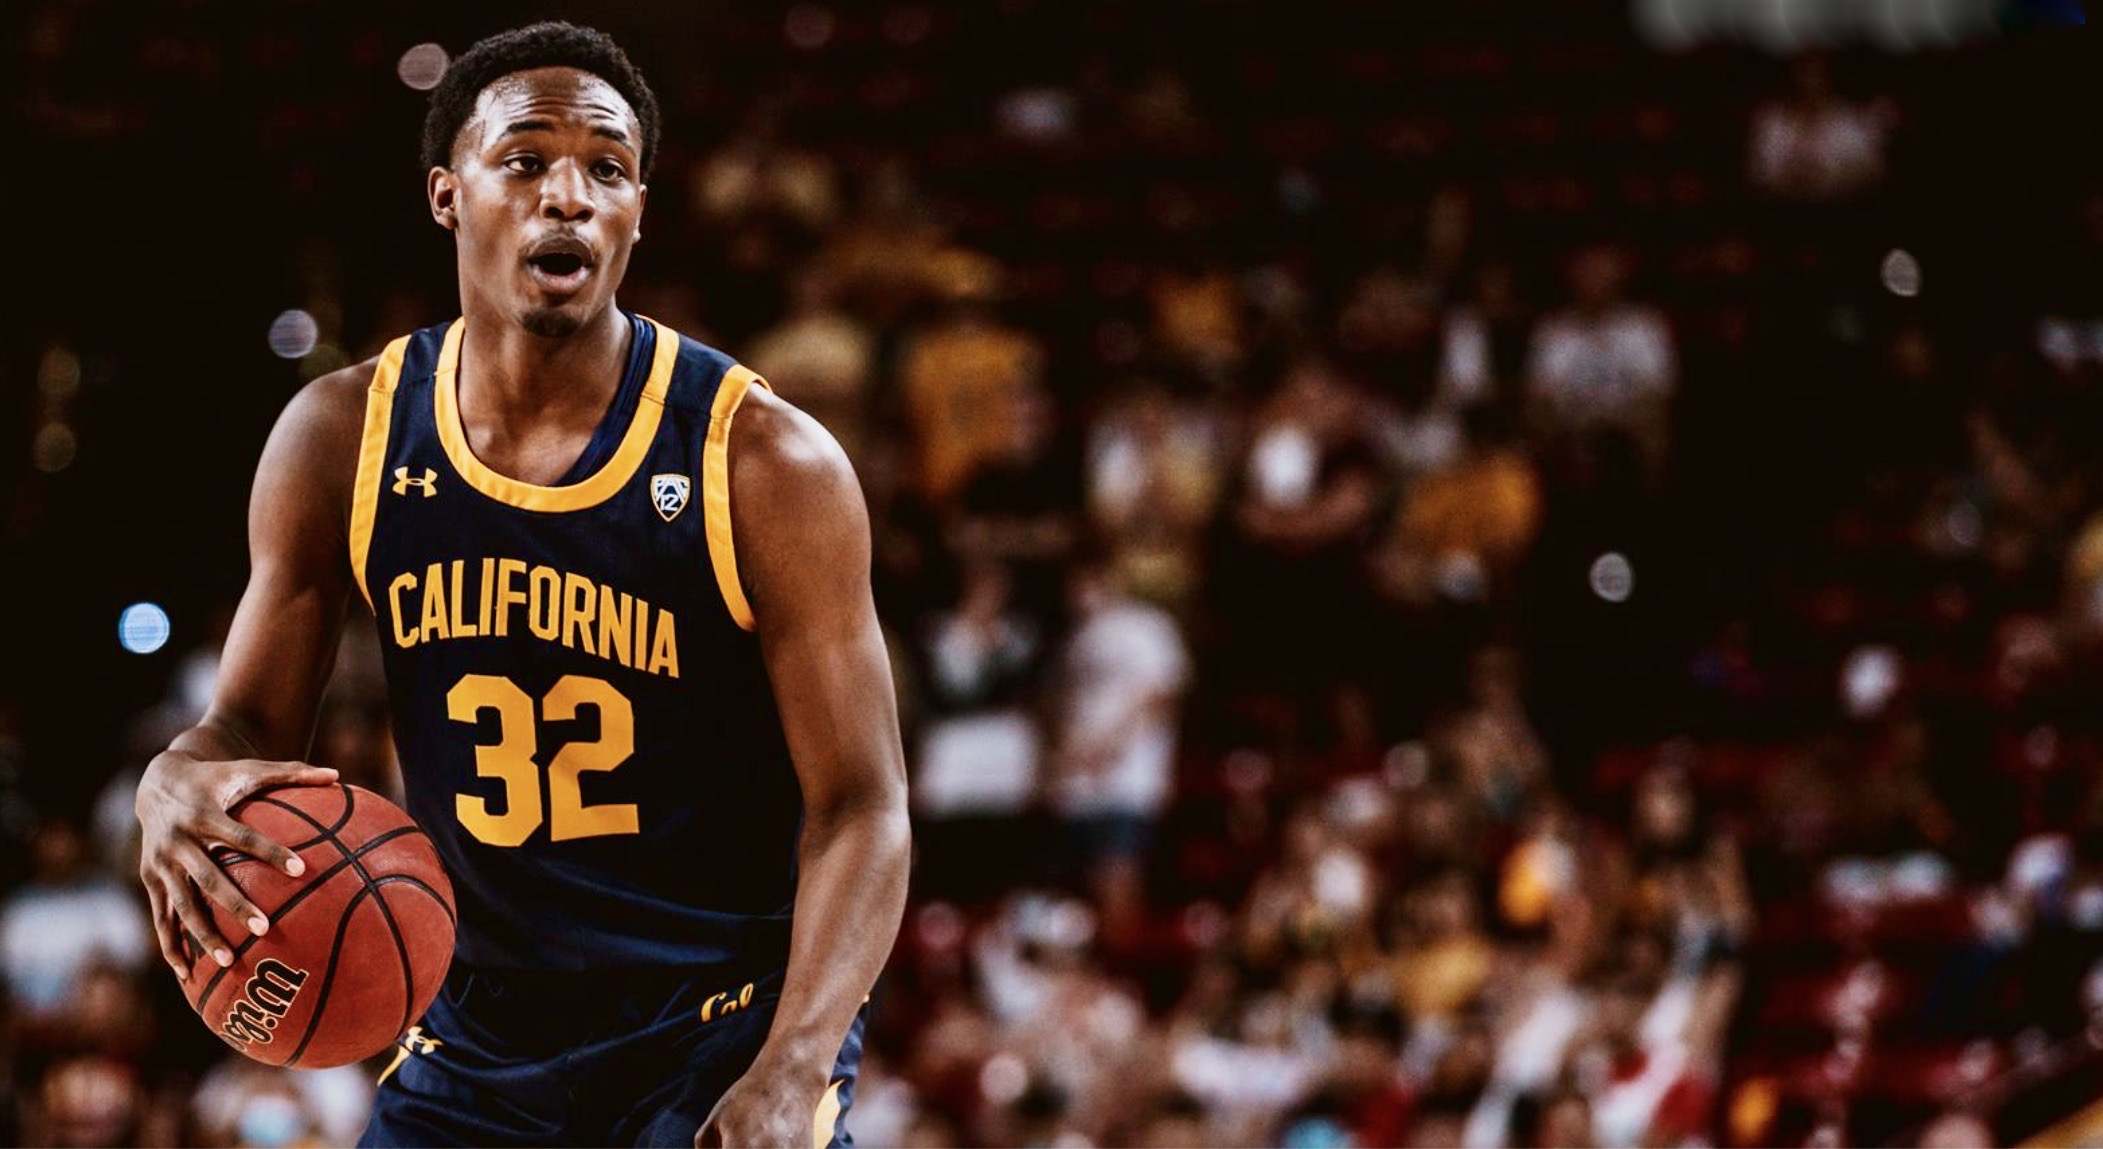 Absent All Season, Cal Guard Jalen Celestine Not Expected Back This Year